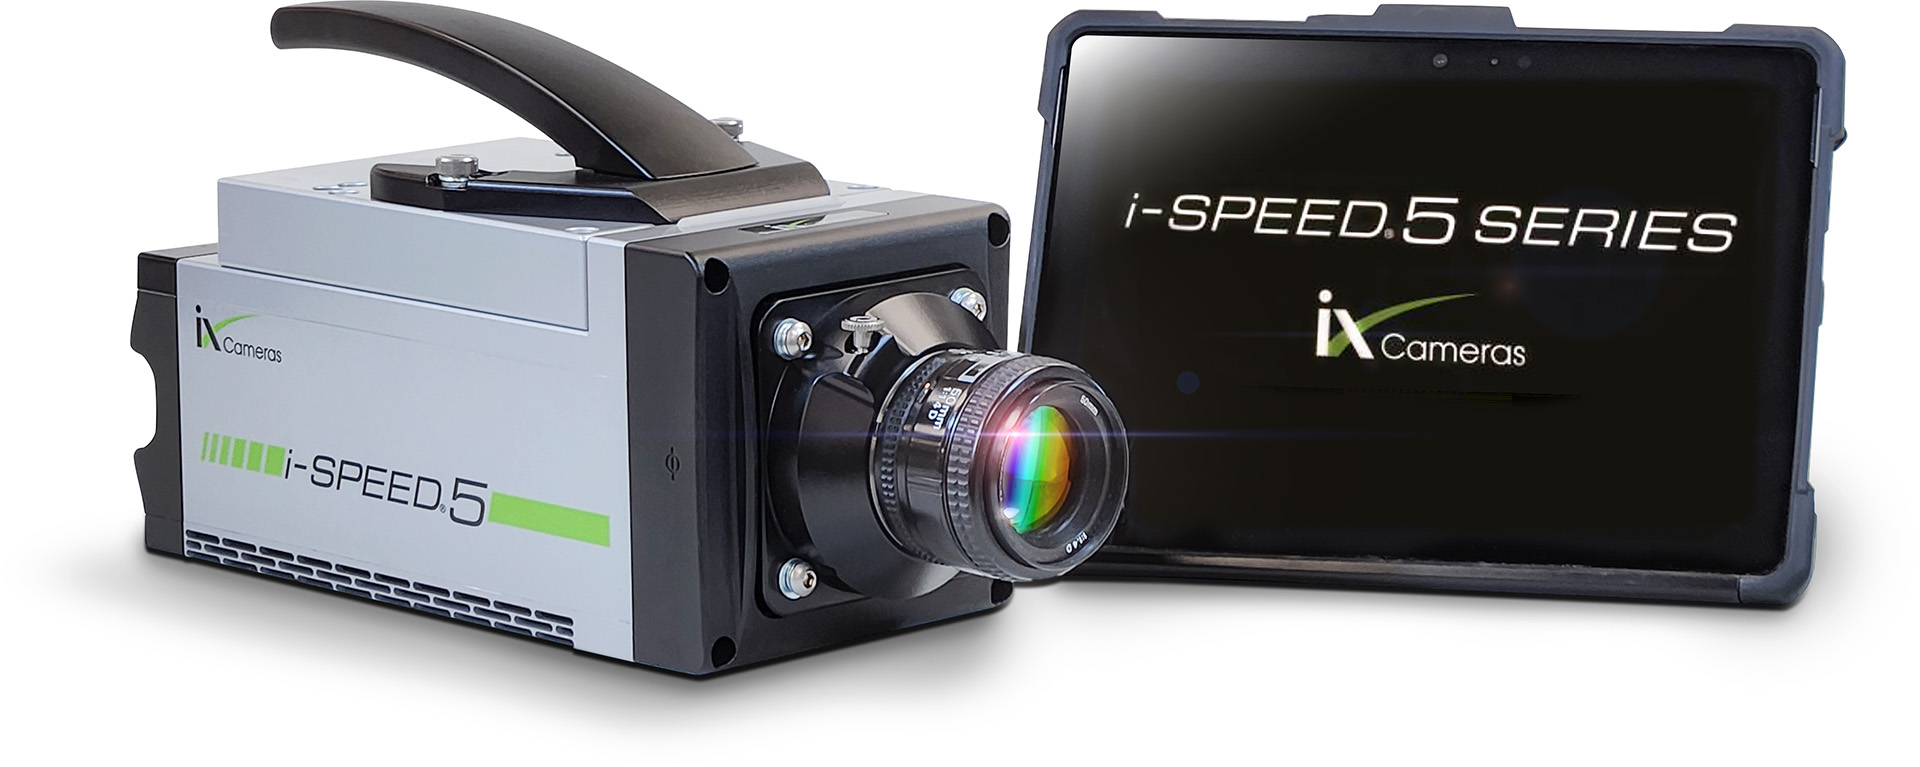 iX Cameras i-SPEED 5 Series G2 camera with CDUe touchscreen tablet.